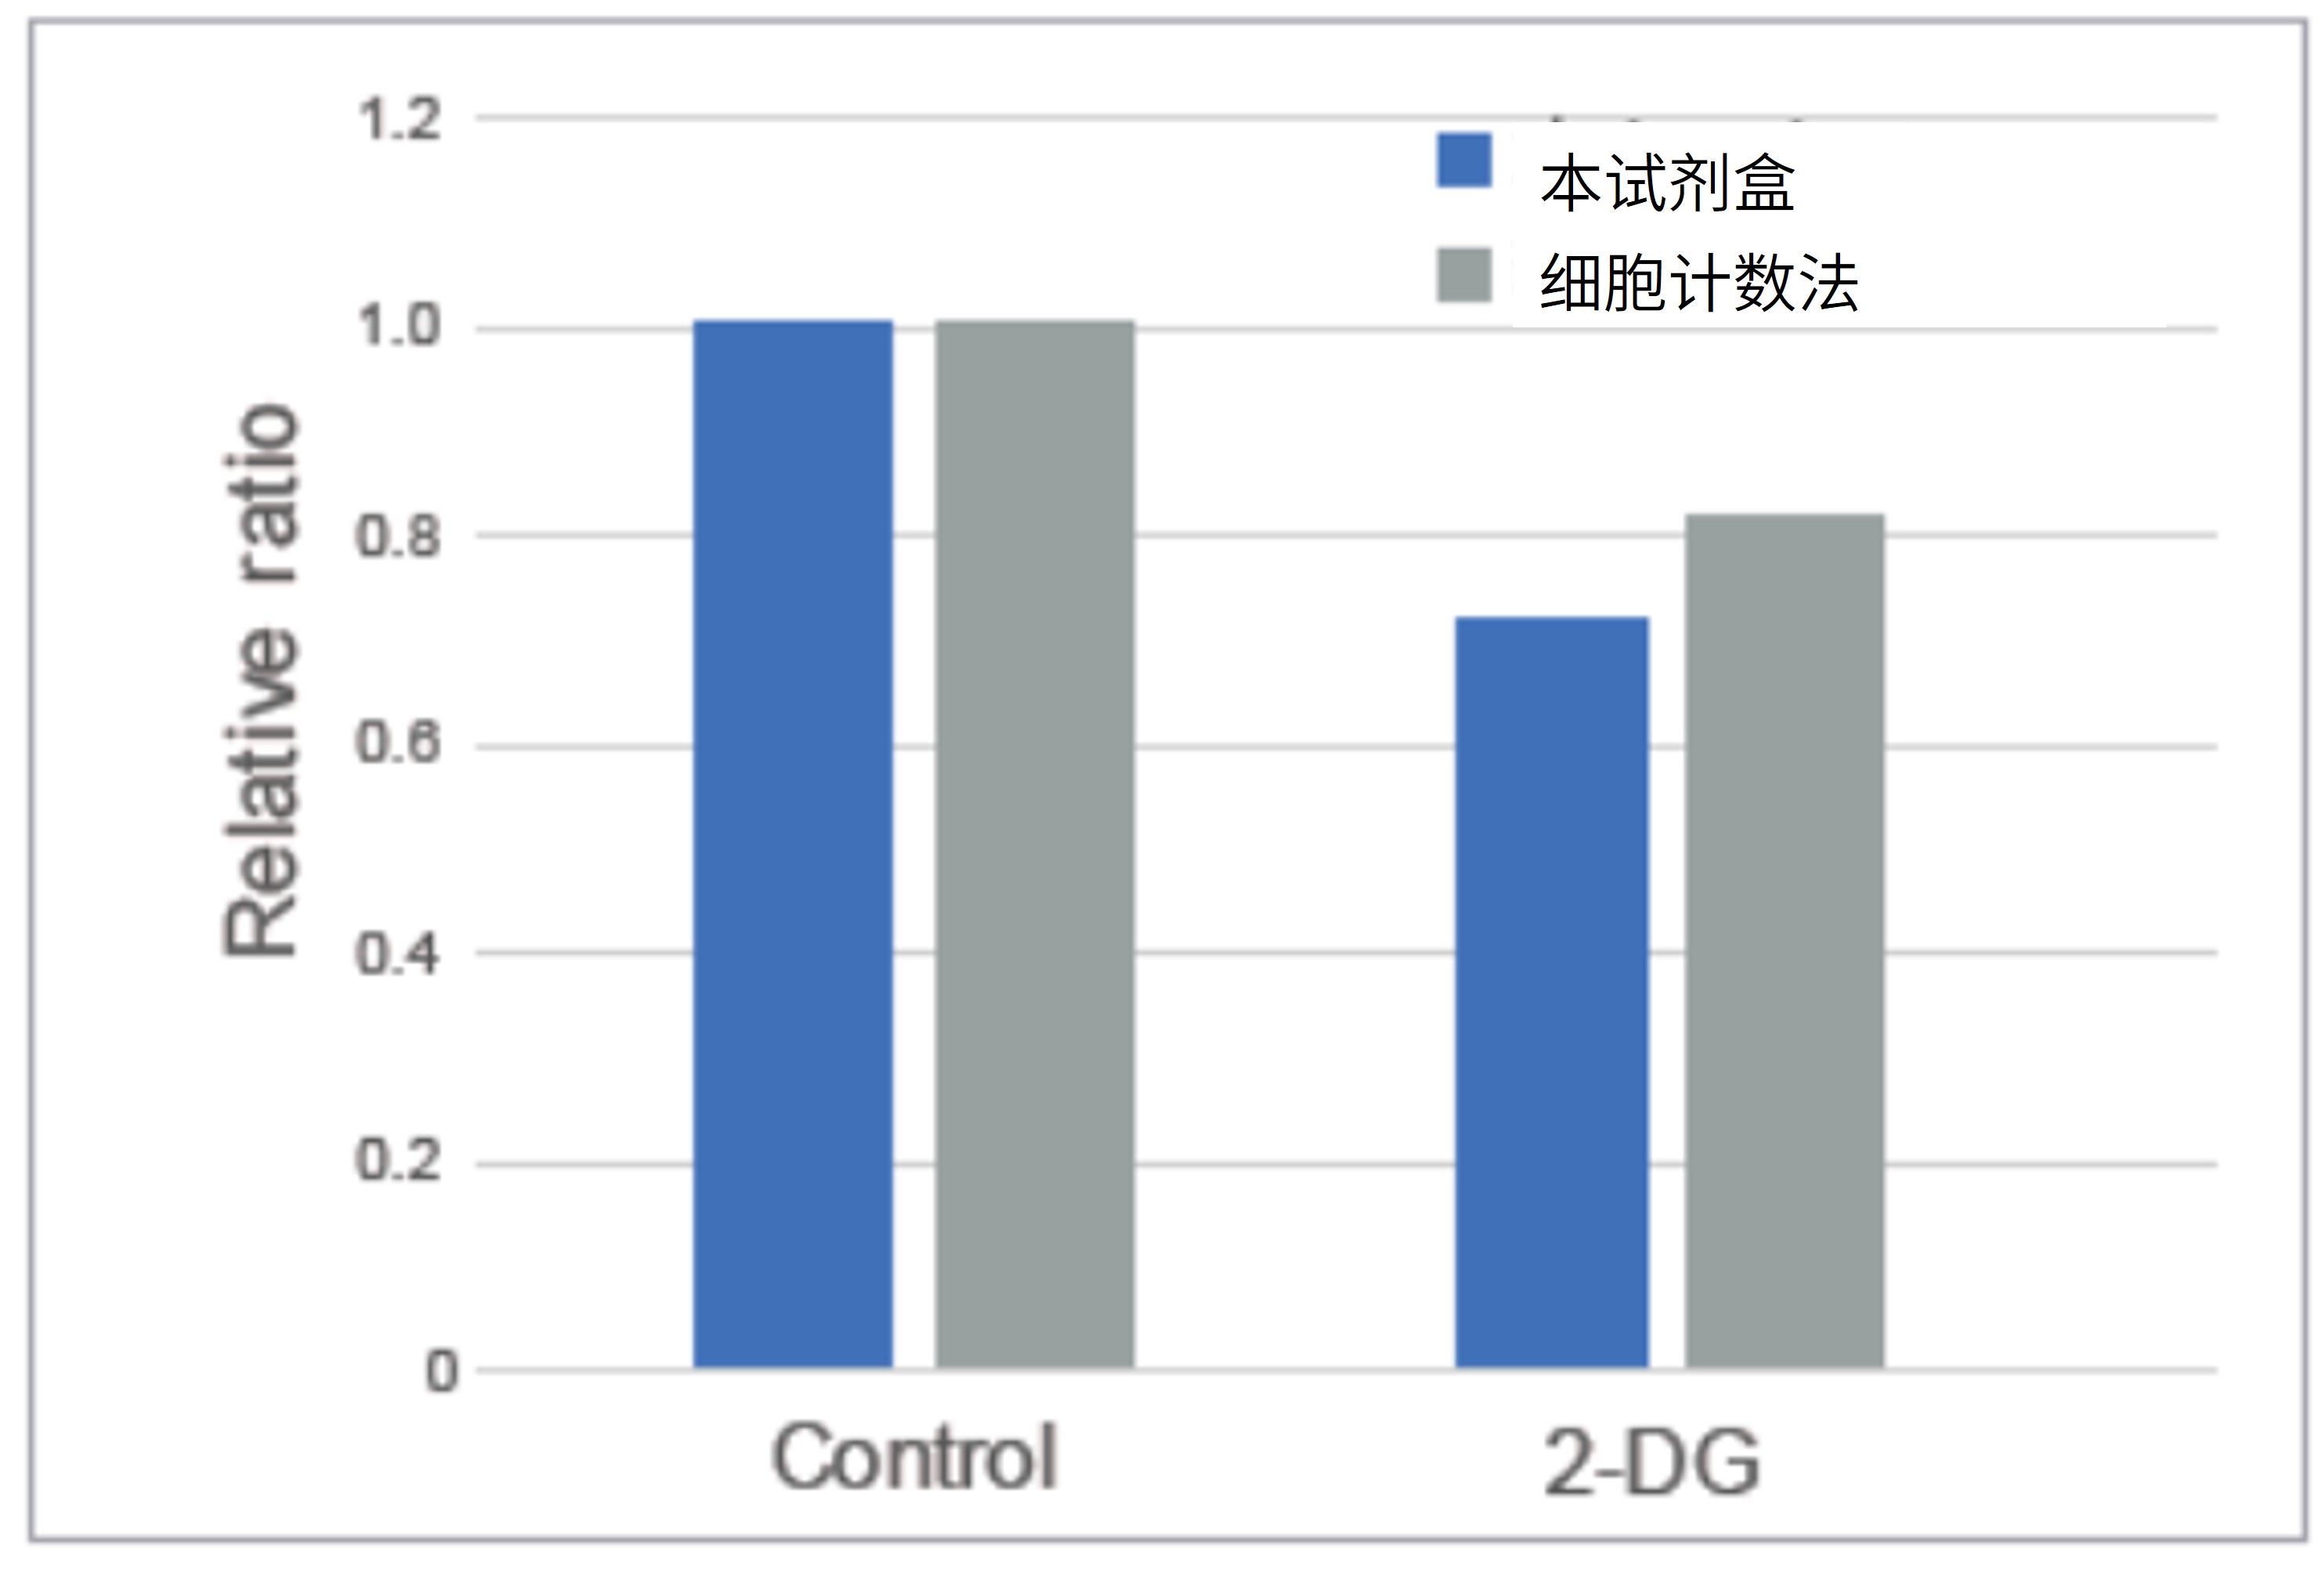 Cell Count Normalization Kit试剂盒货号：C544